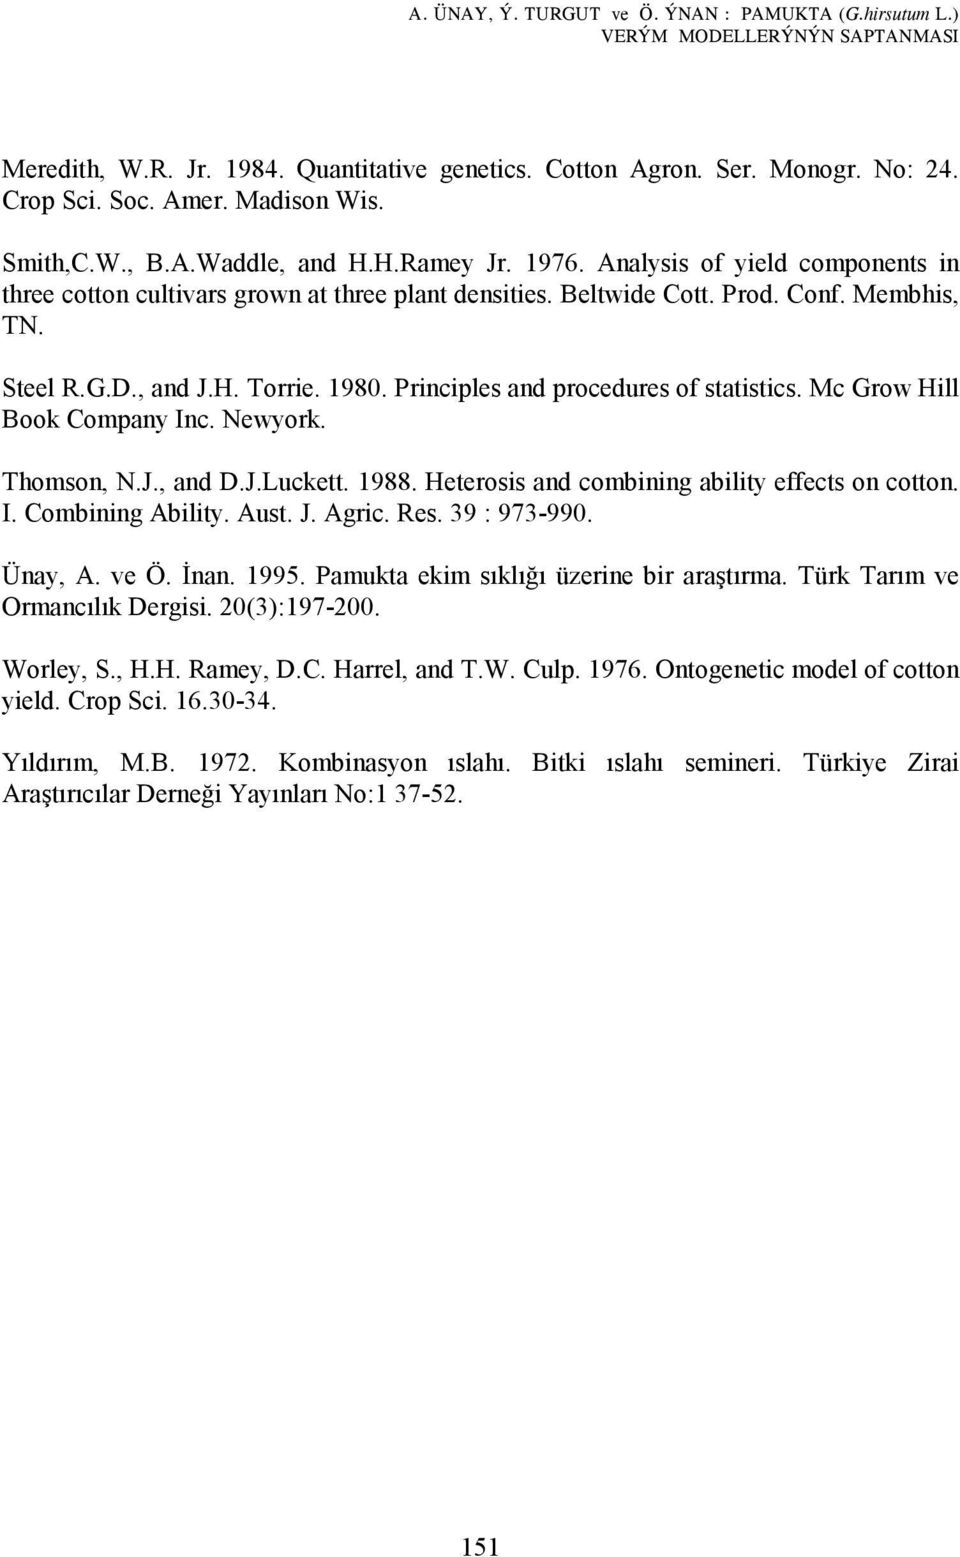 , and J.H. Torrie. 1980. Principles and procedures of statistics. Mc Grow Hill Book Company Inc. Newyork. Thomson, N.J., and D.J.Luckett. 1988. Heterosis and combining ability effects on cotton. I. Combining Ability.